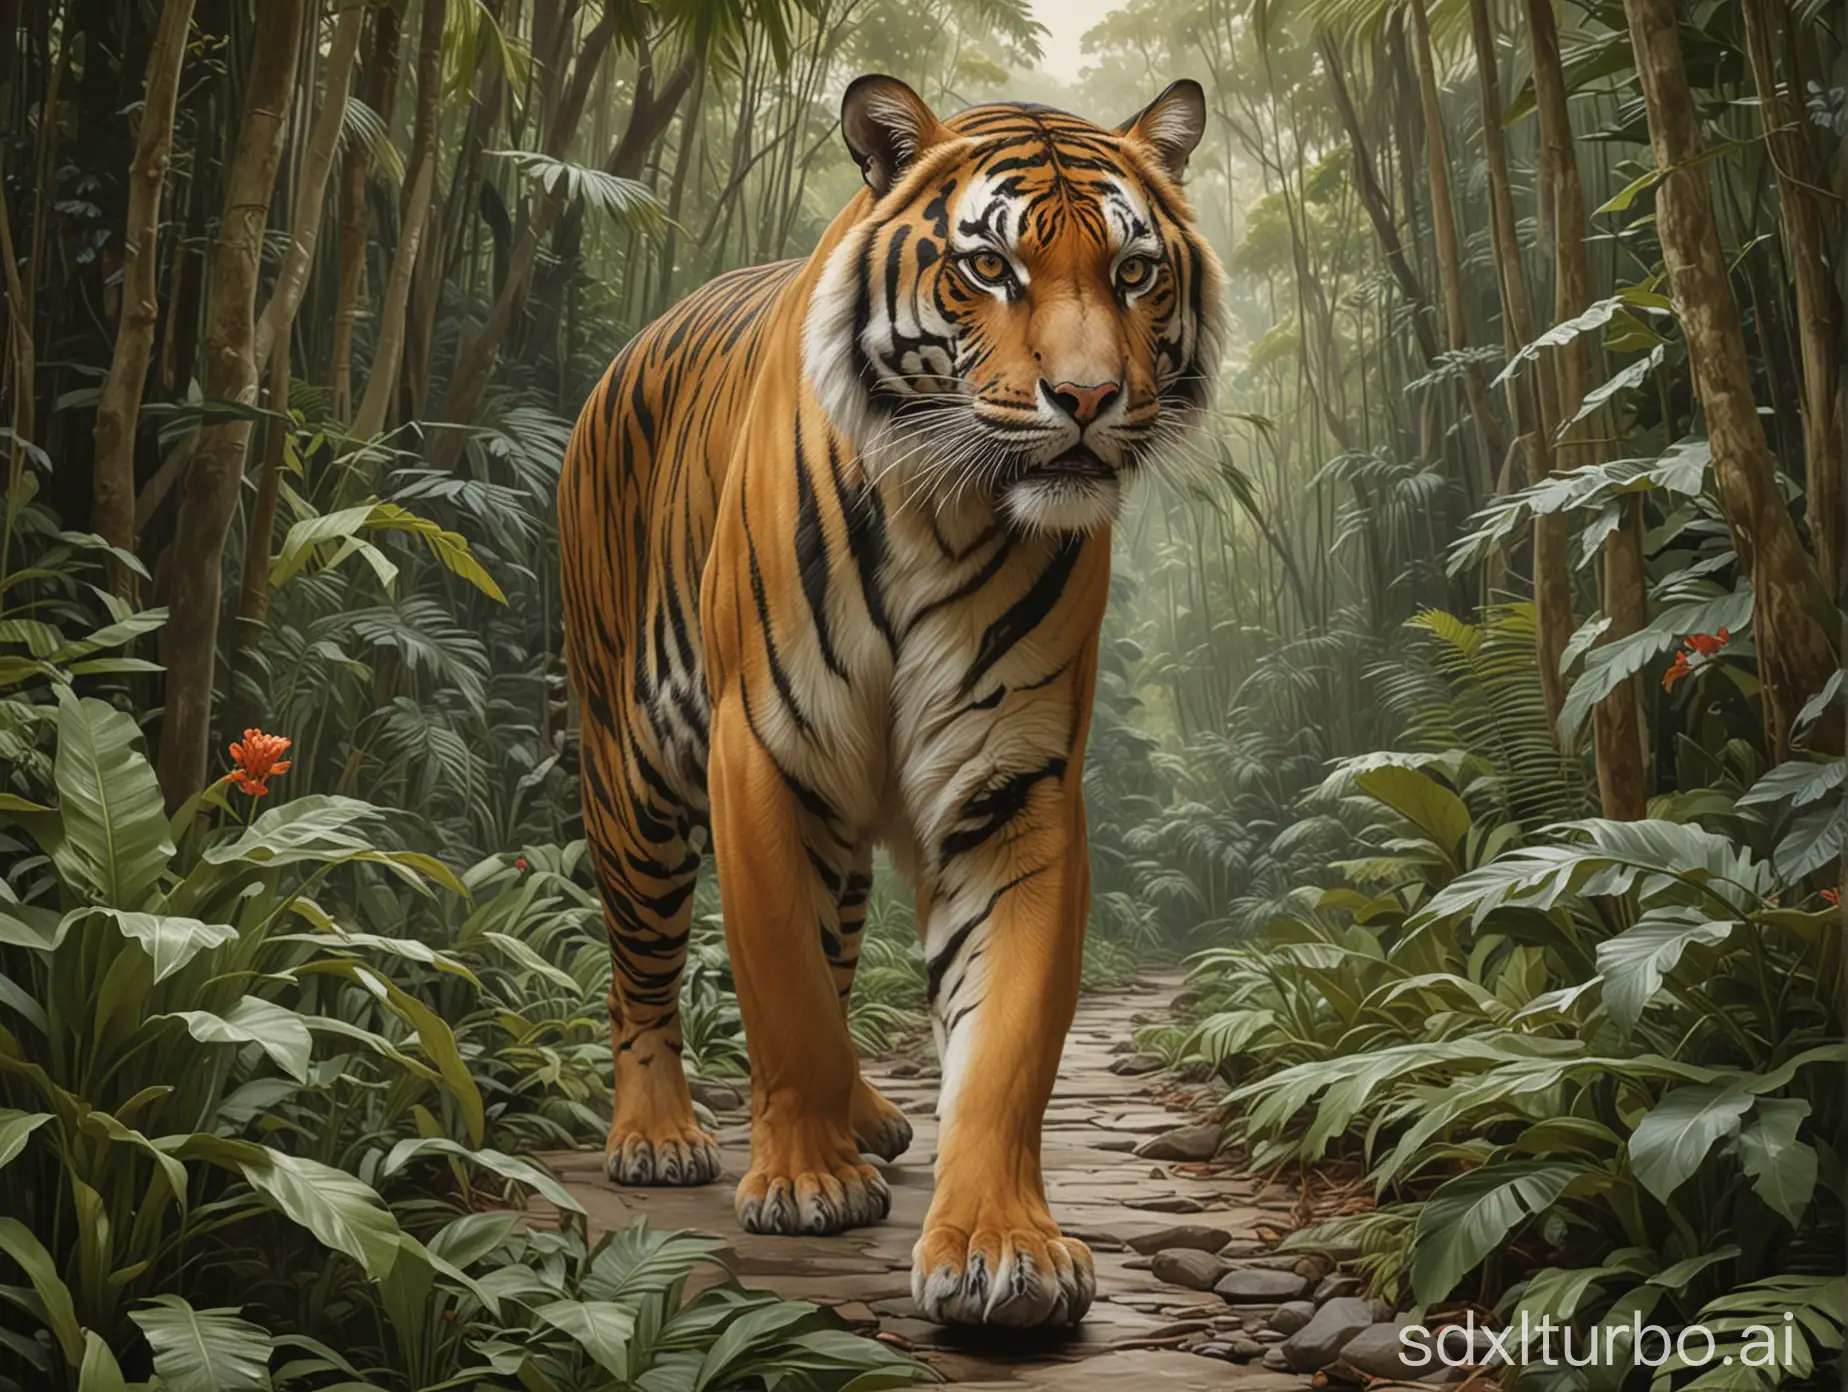 A walking tiger With a background of an Indonesian rainforest in the style of painting by Leyendecker